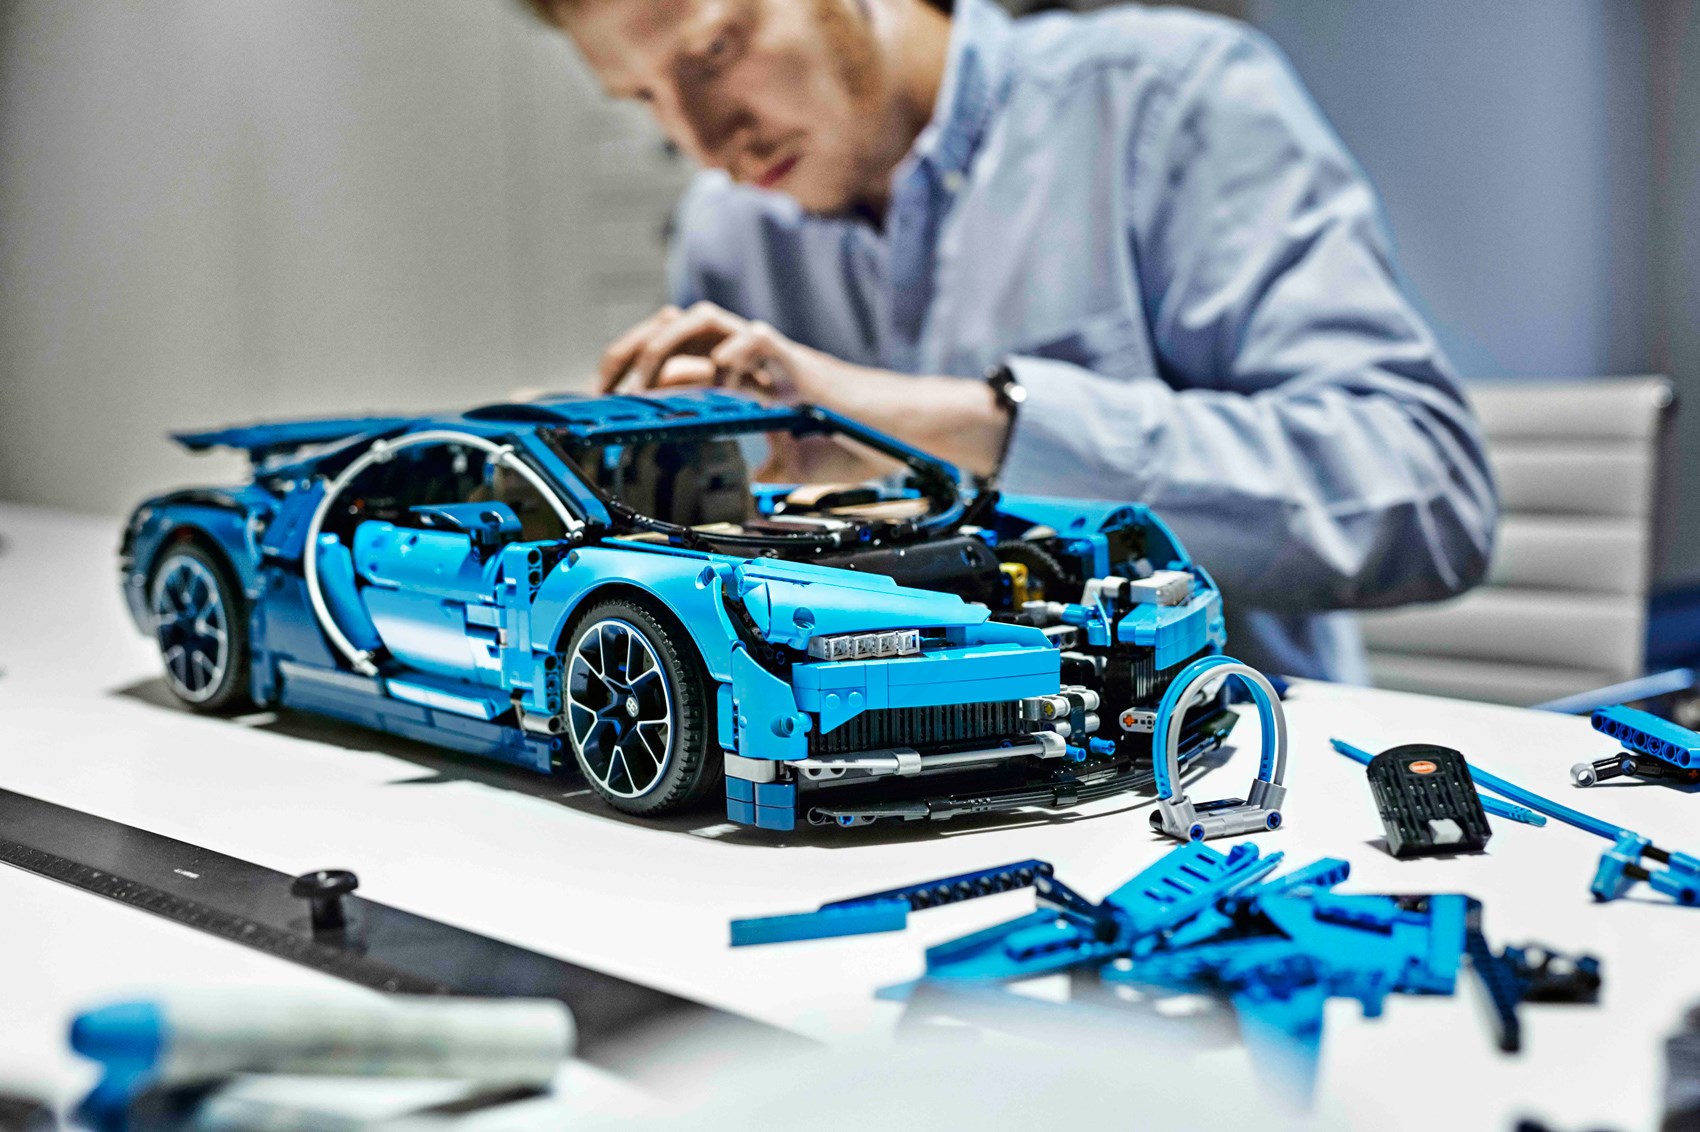 LEGO 42083 Technic Bugatti Chiron, Unboxing, High-Speed Build & Review 